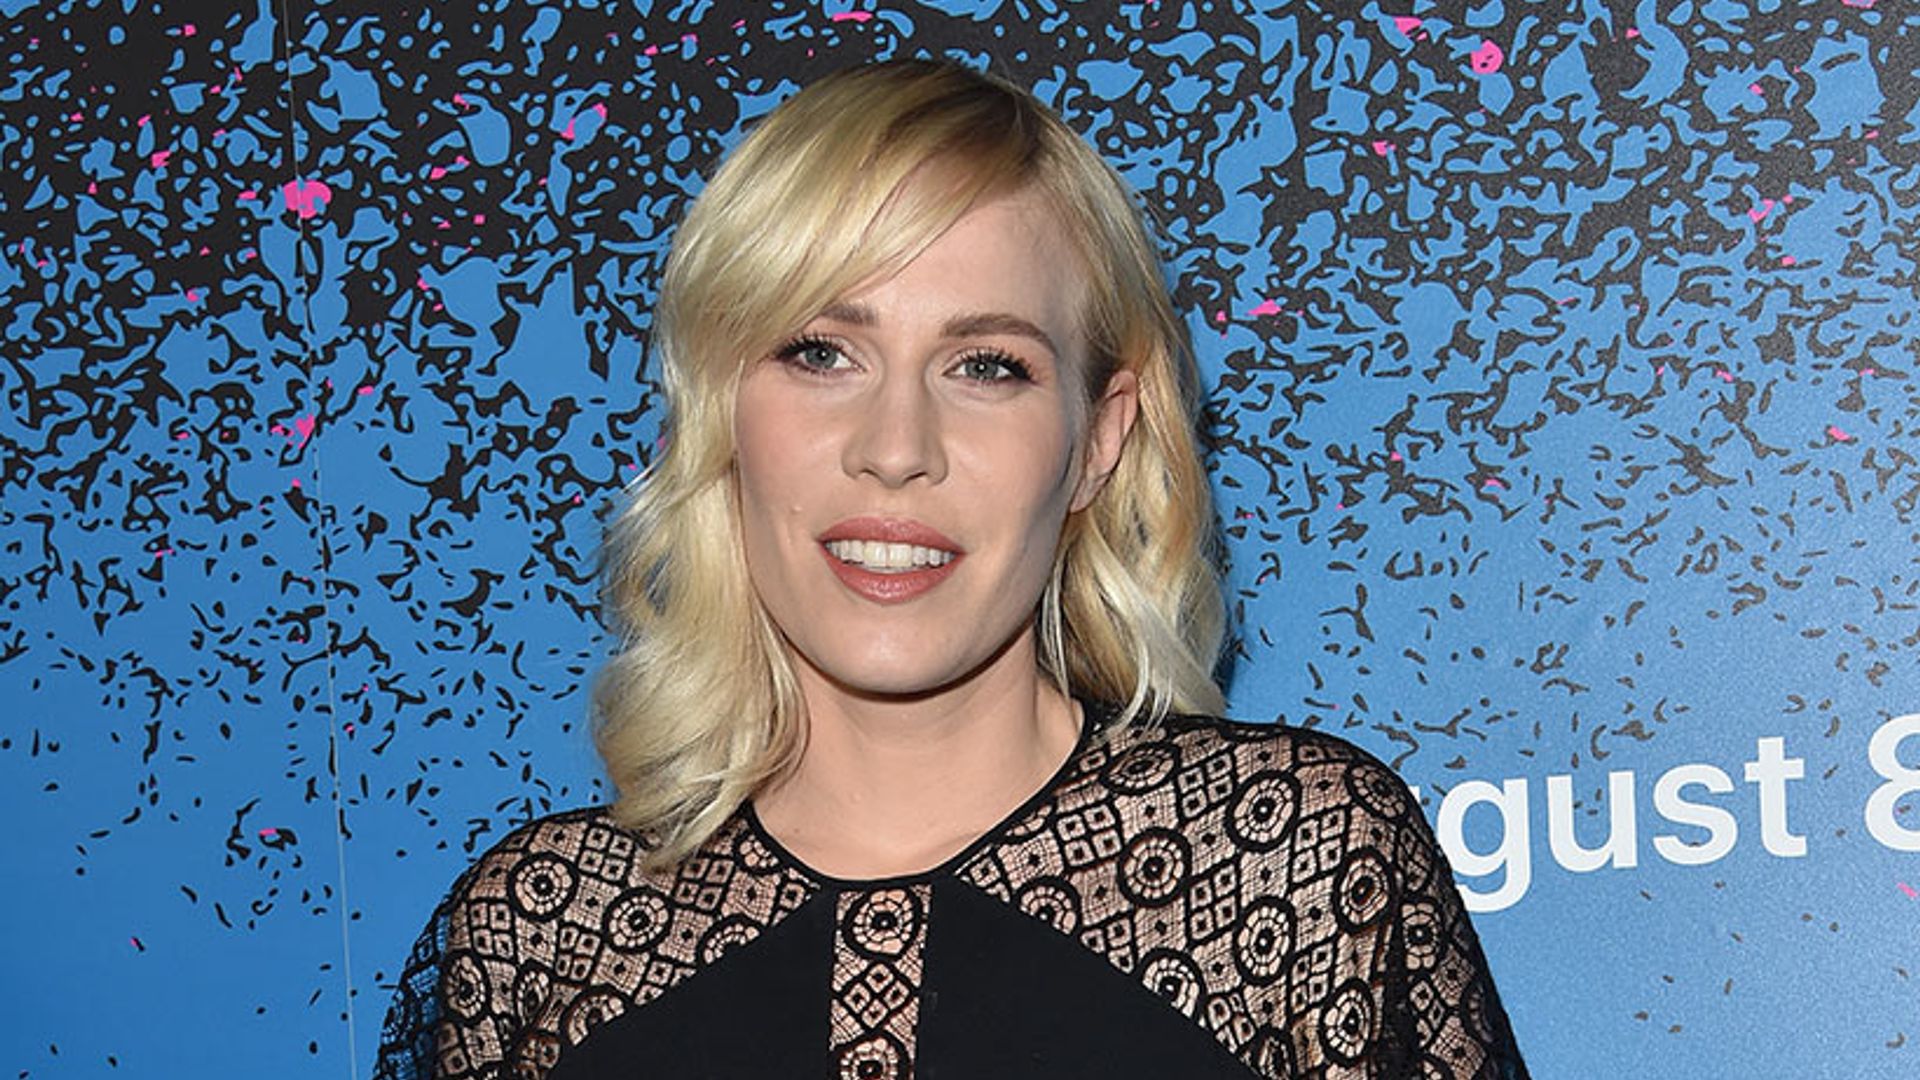 Natasha Bedingfield is pregnant with her first baby!